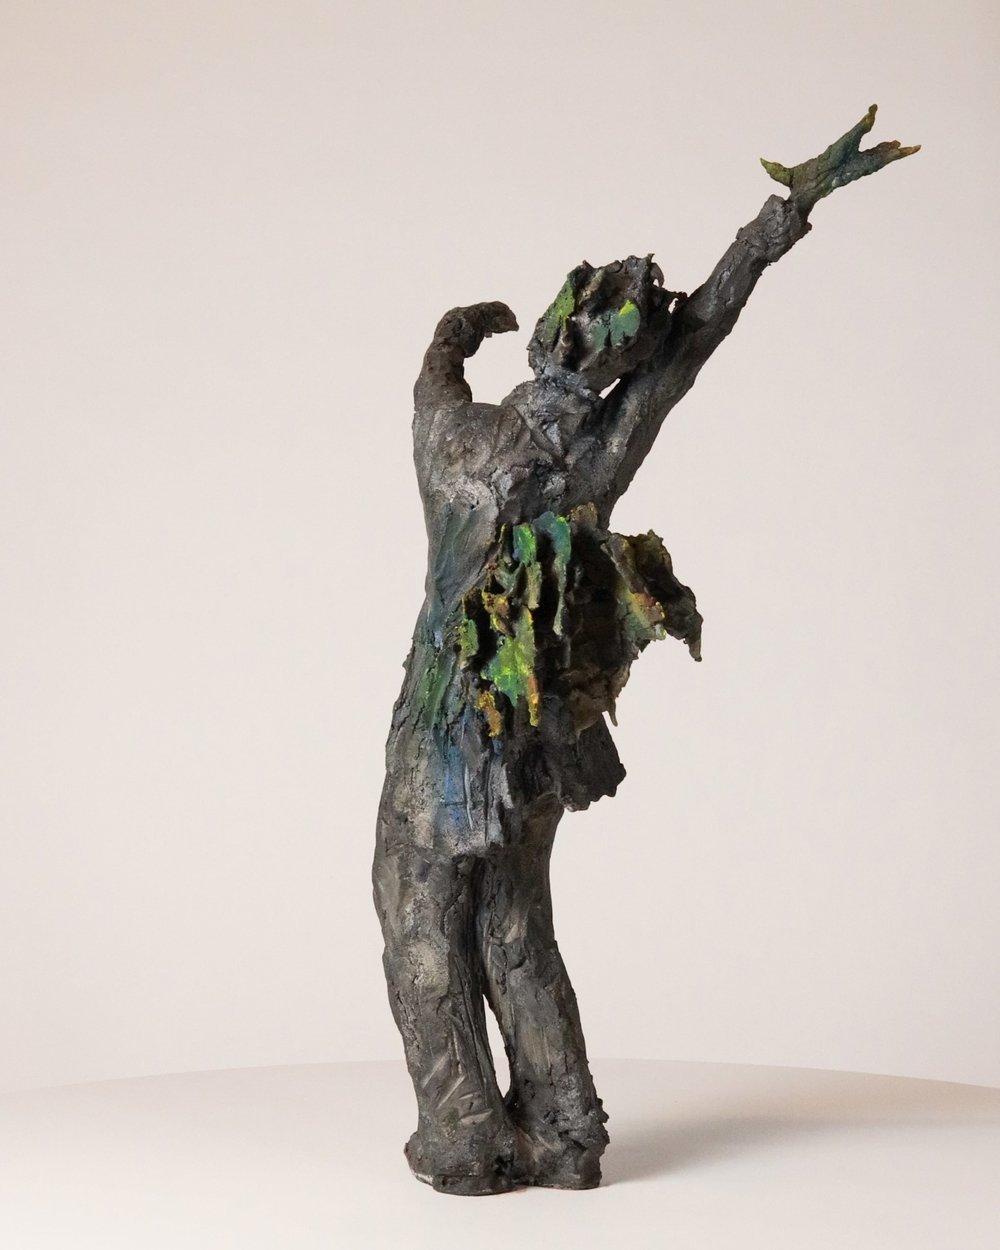 This piece represents a human figure with a tail and a headdress in feather. In this sculpture the birdcatcher, a man who is catching birds with nets and traps, seems to transform into a bird himself. In recent years, animals have taken an